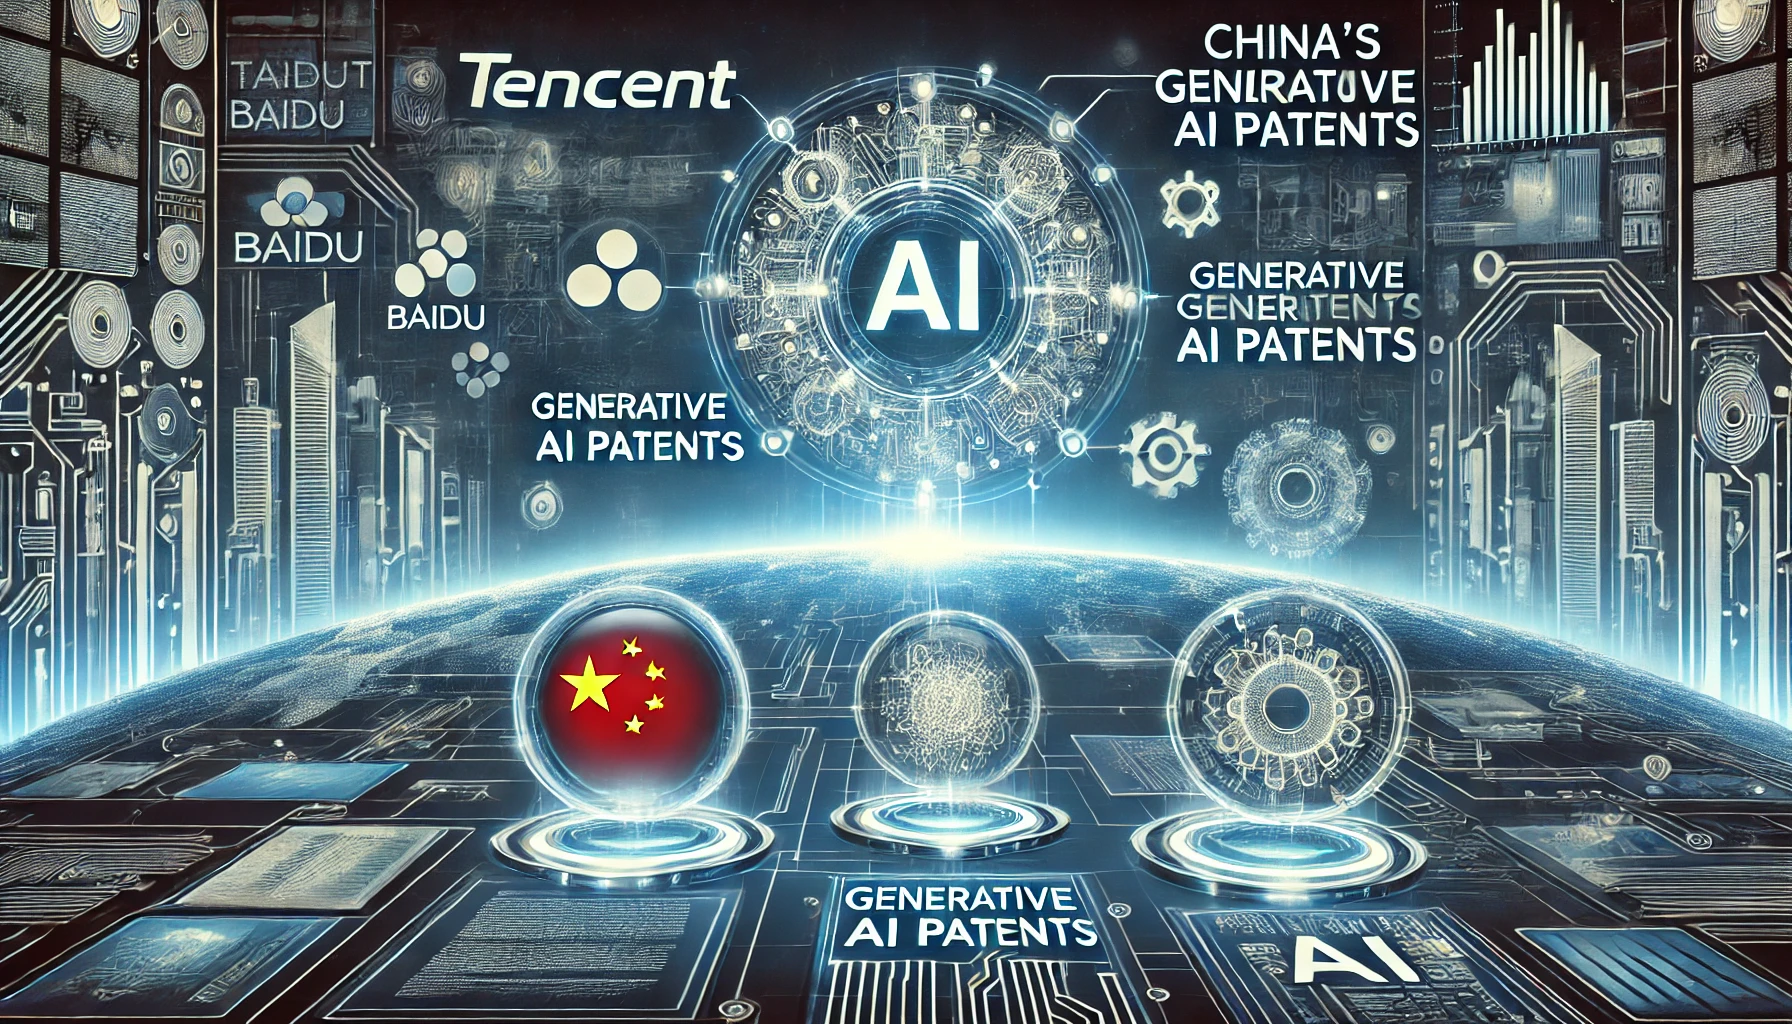 illustration showing China's dominance in generative AI patents. Include Chinese tech company logos like Tencent and Baidu, patent documents, and A